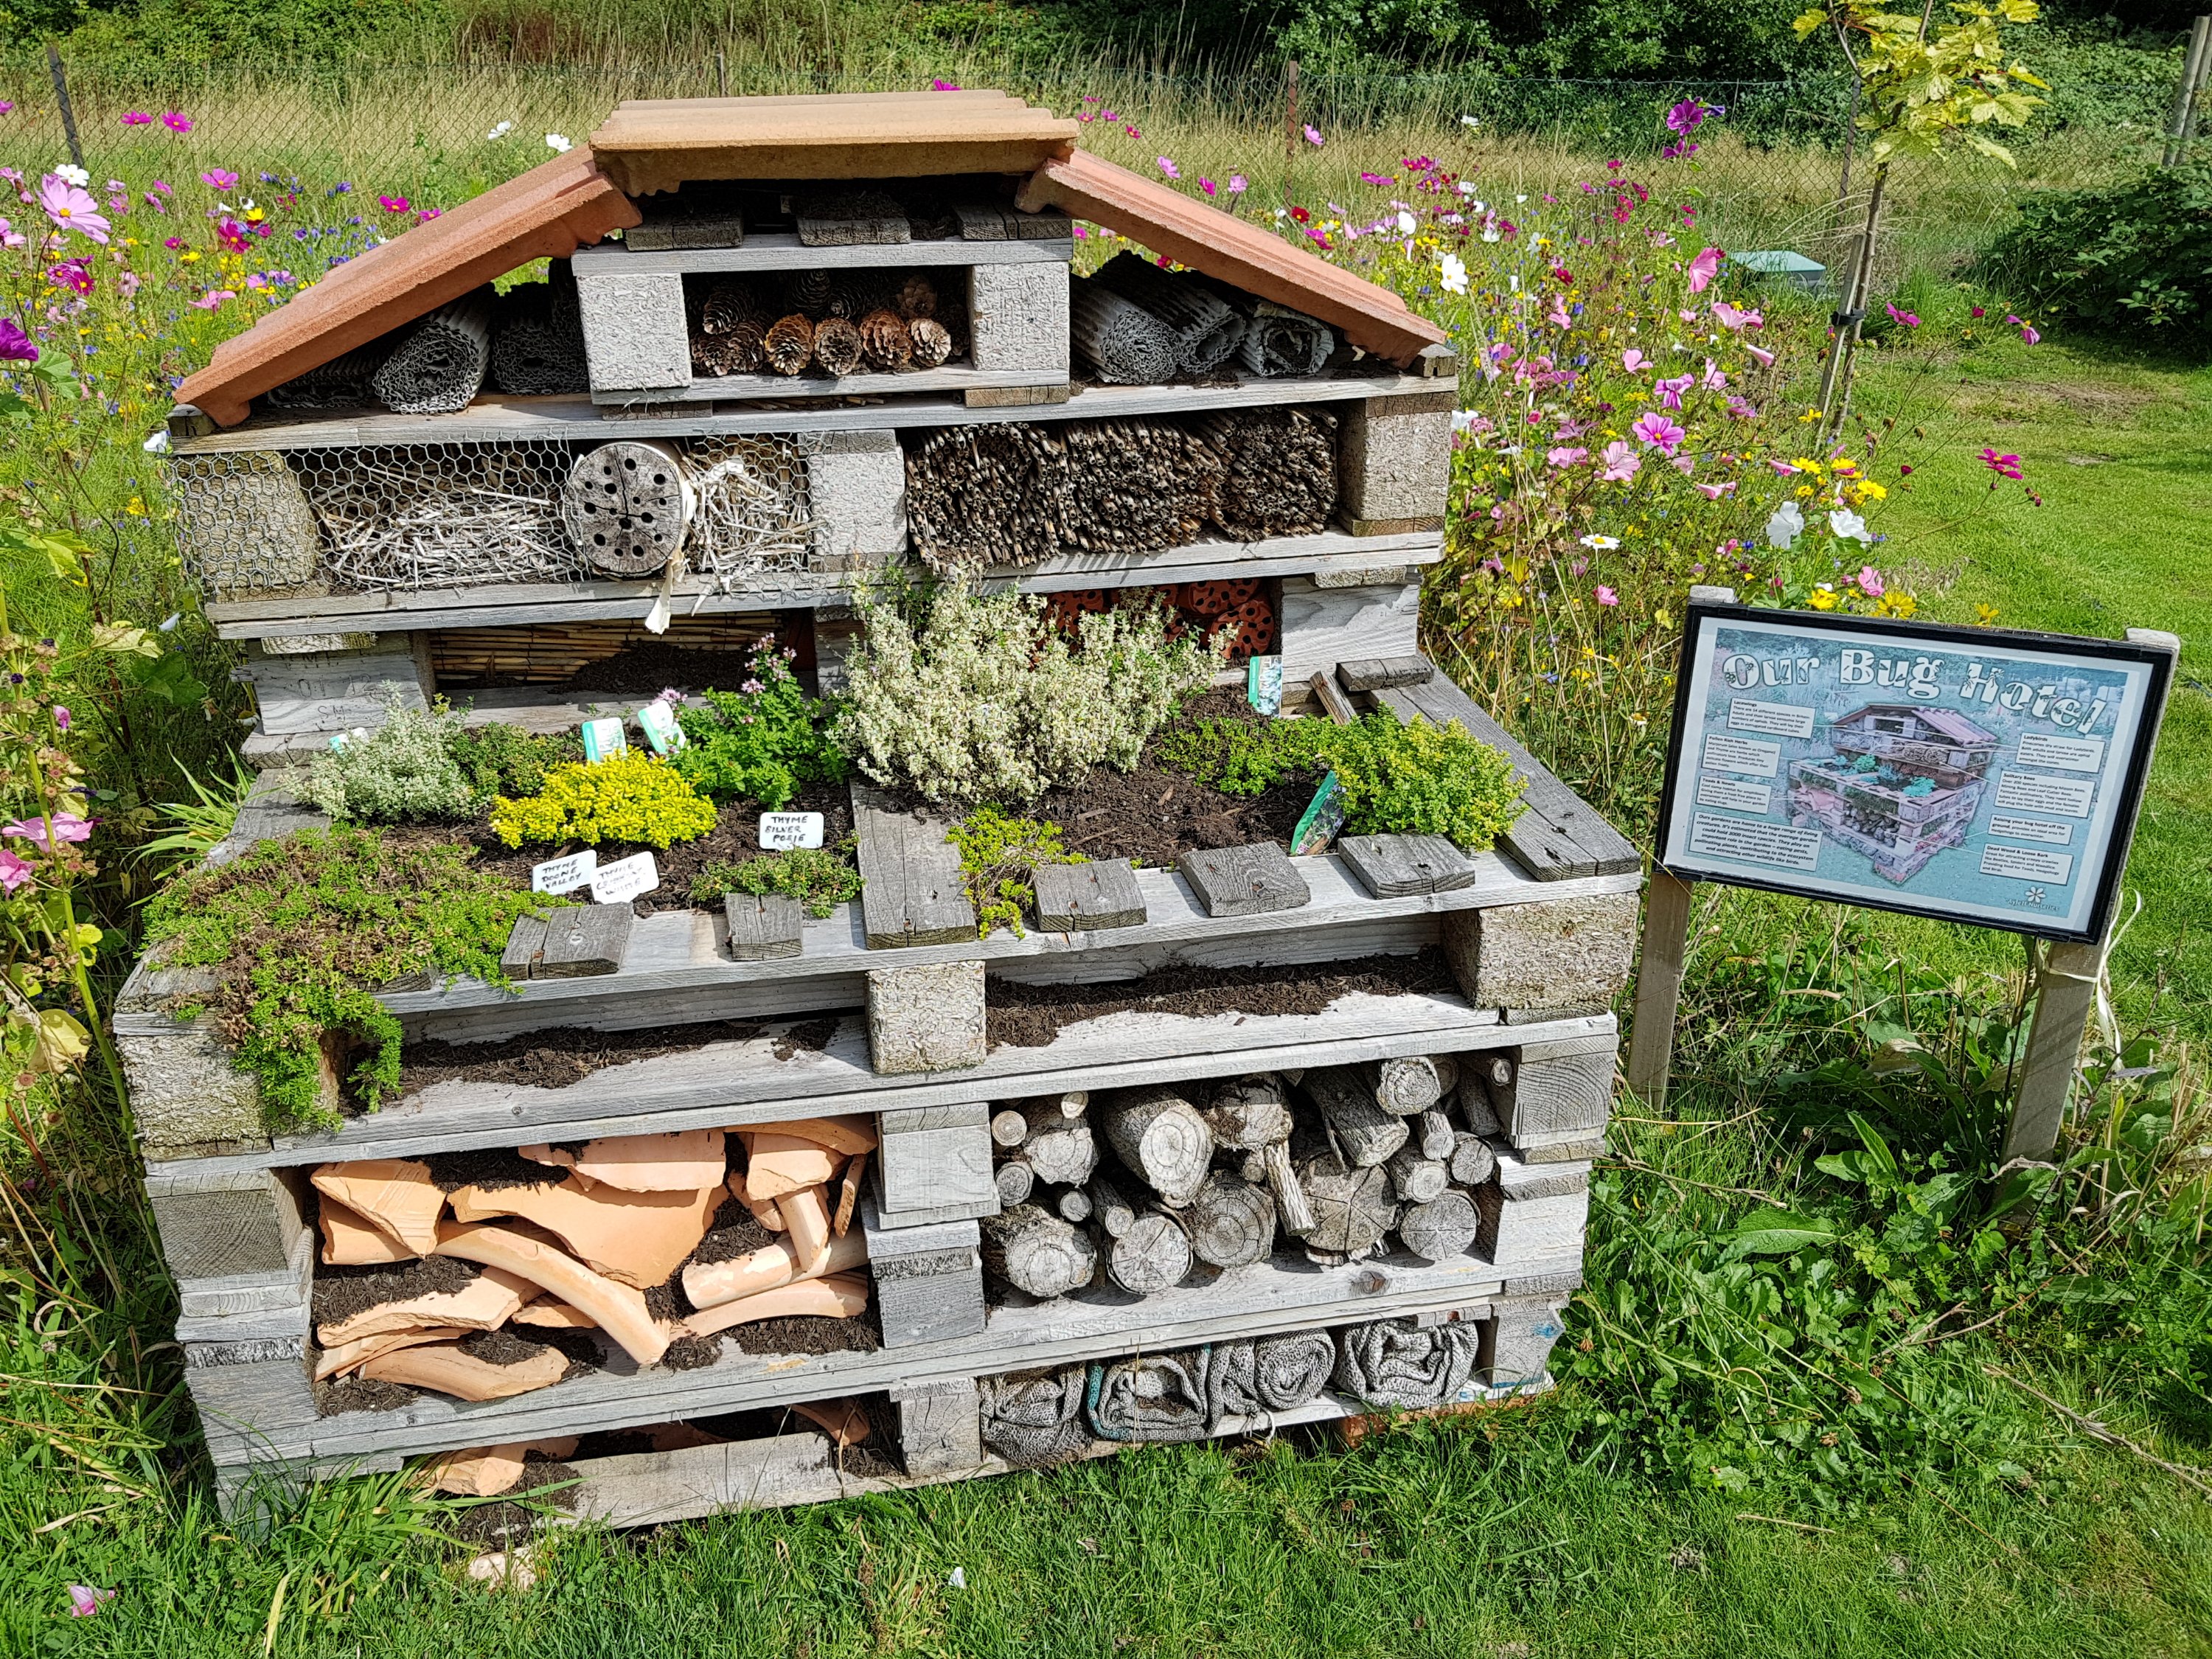 Celebration Gardens, bug hotel, wildlife, insects, outdoors, get outside, nature, places to visit, Aylett Nurseries, Hertfordshire, Living Life Our Way